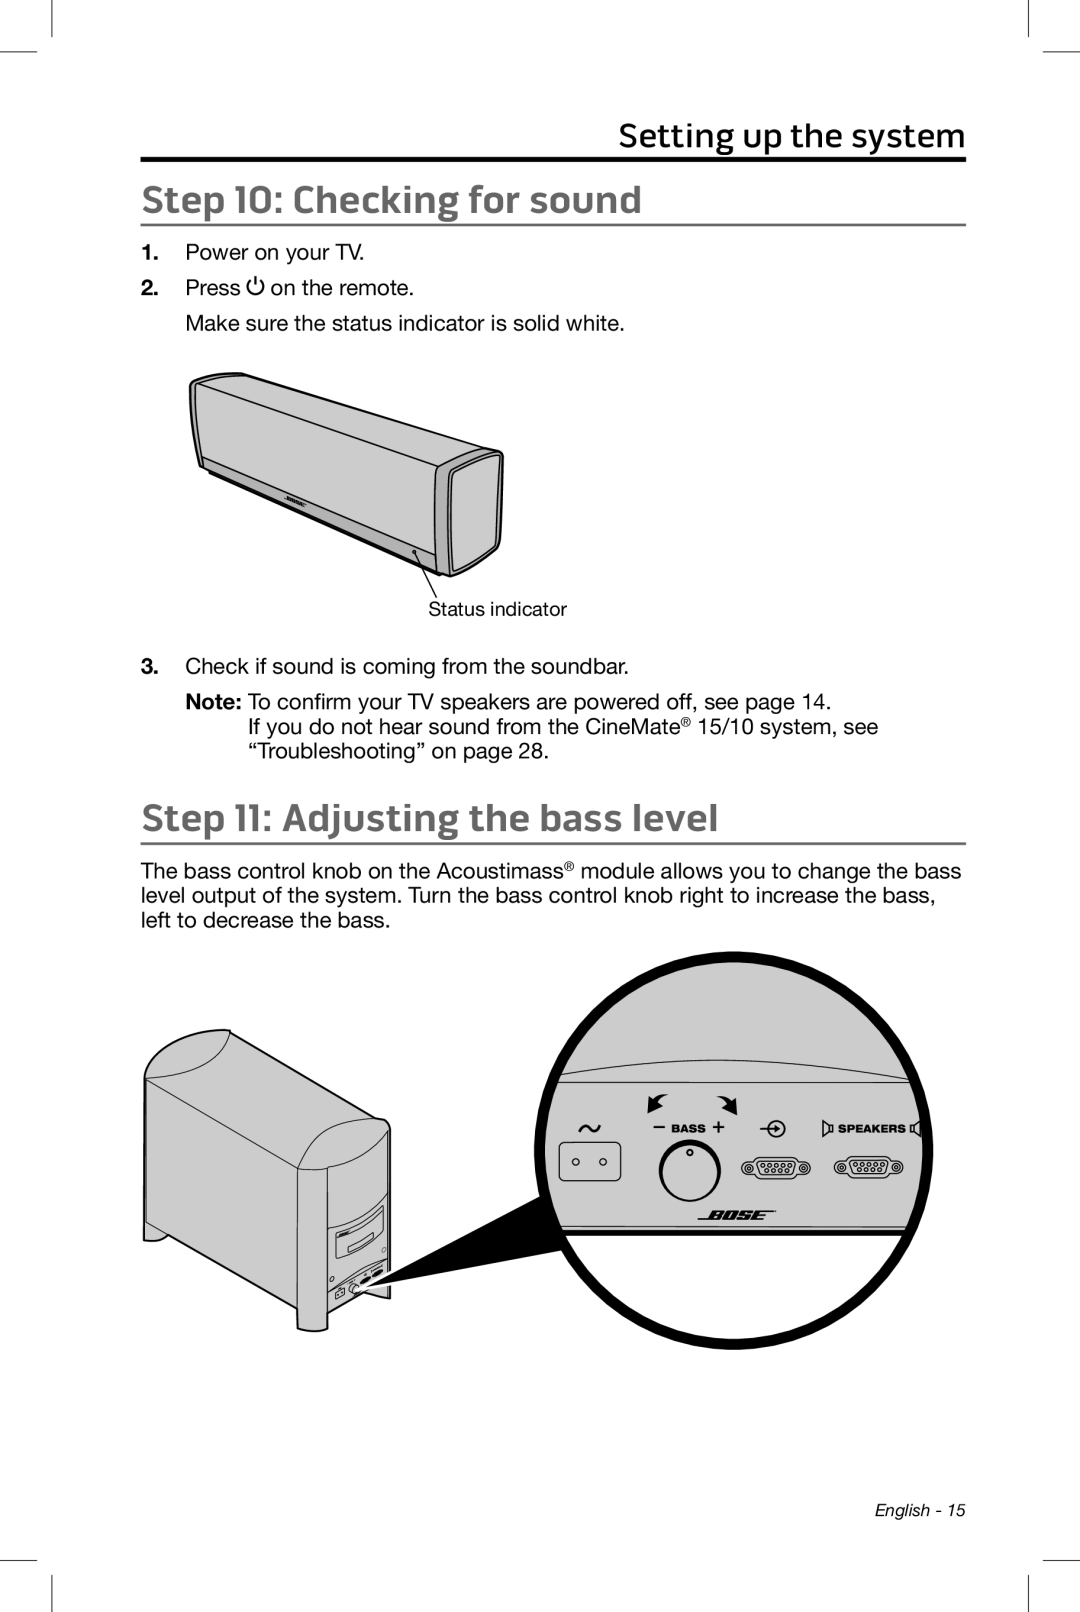 Bose CineMate 15/10 manual Checking for sound, Adjusting the bass level, Setting up the system 